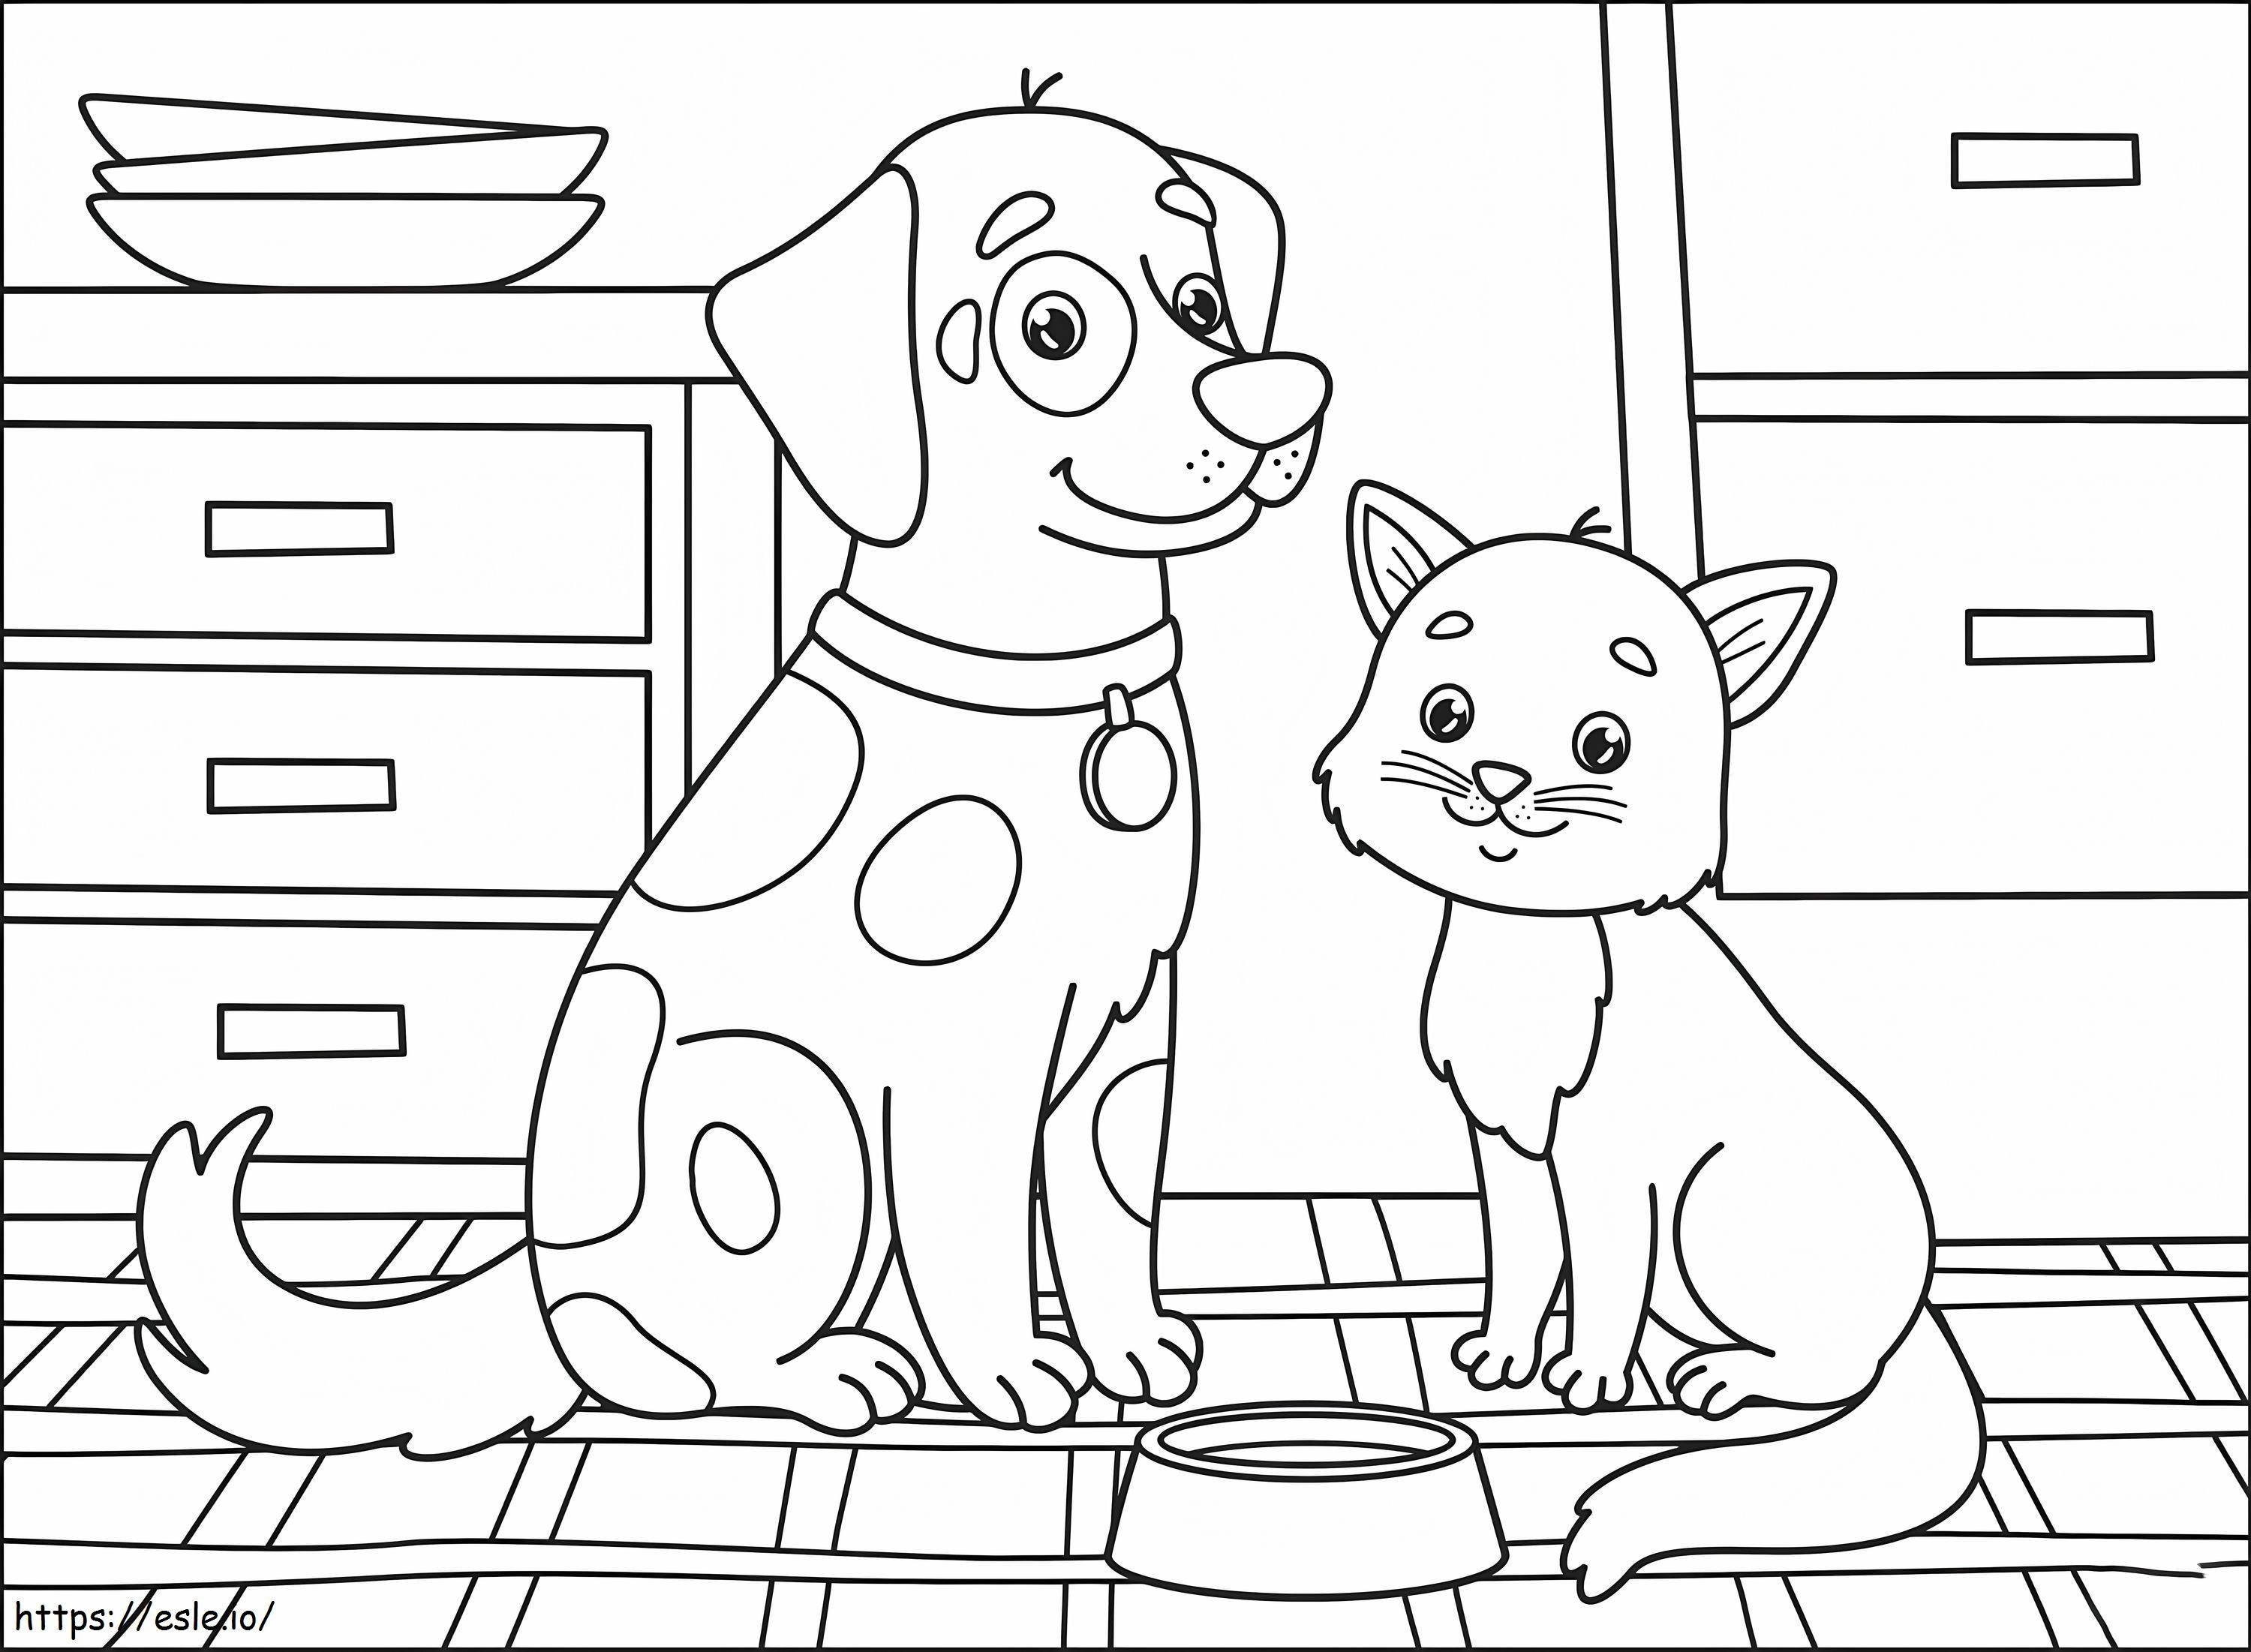 Dog And Cat In The House coloring page